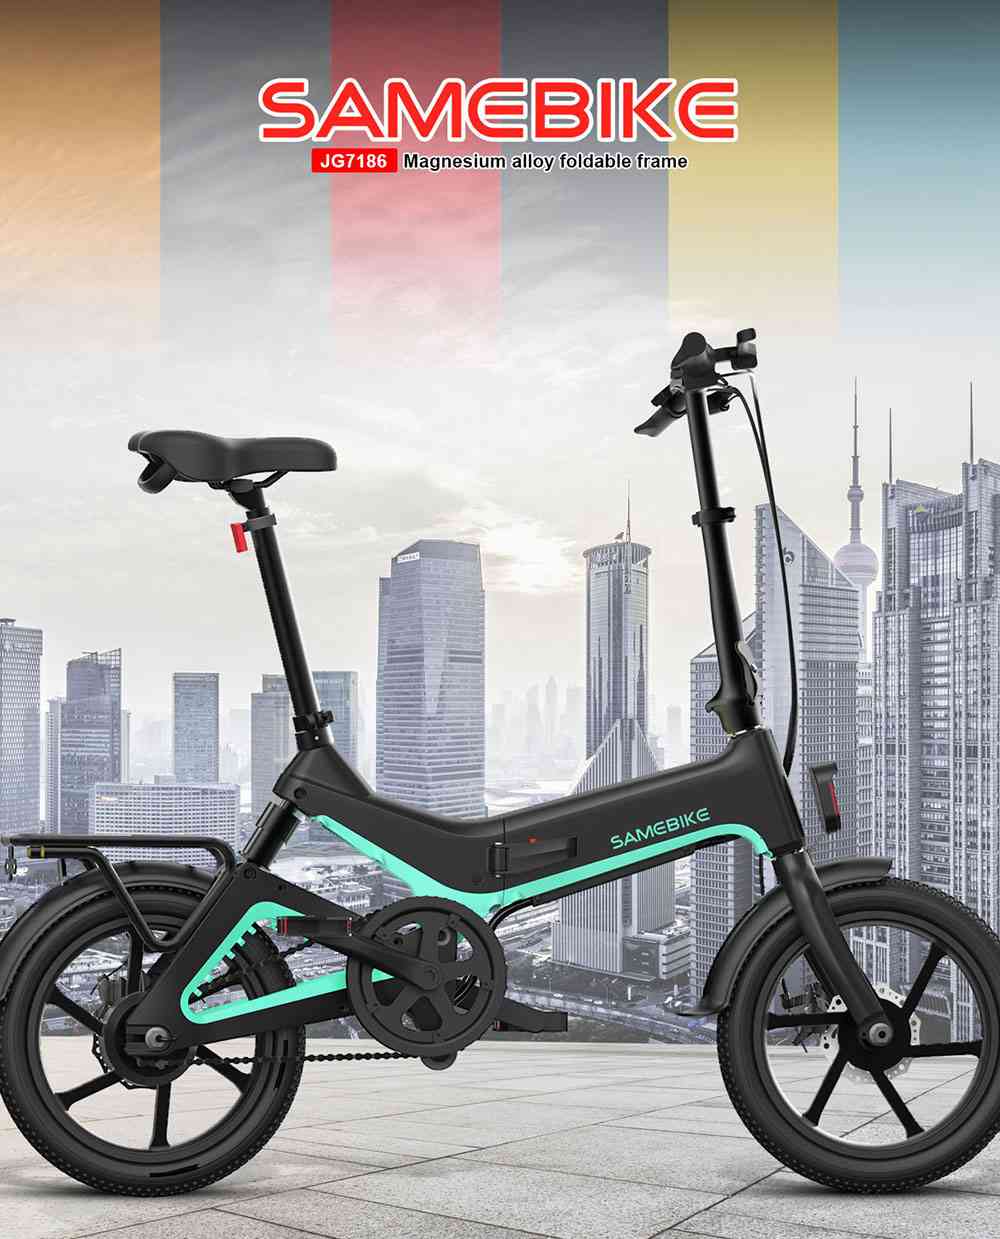 Samebike JG7186 Folding Electric Moped Bike 16 Inch Inflatable Tires 250W Motor Smart Display Adjustable Heights Up To 25km/h Speed Max 65km Long Range For Adults & Teenagers - Red